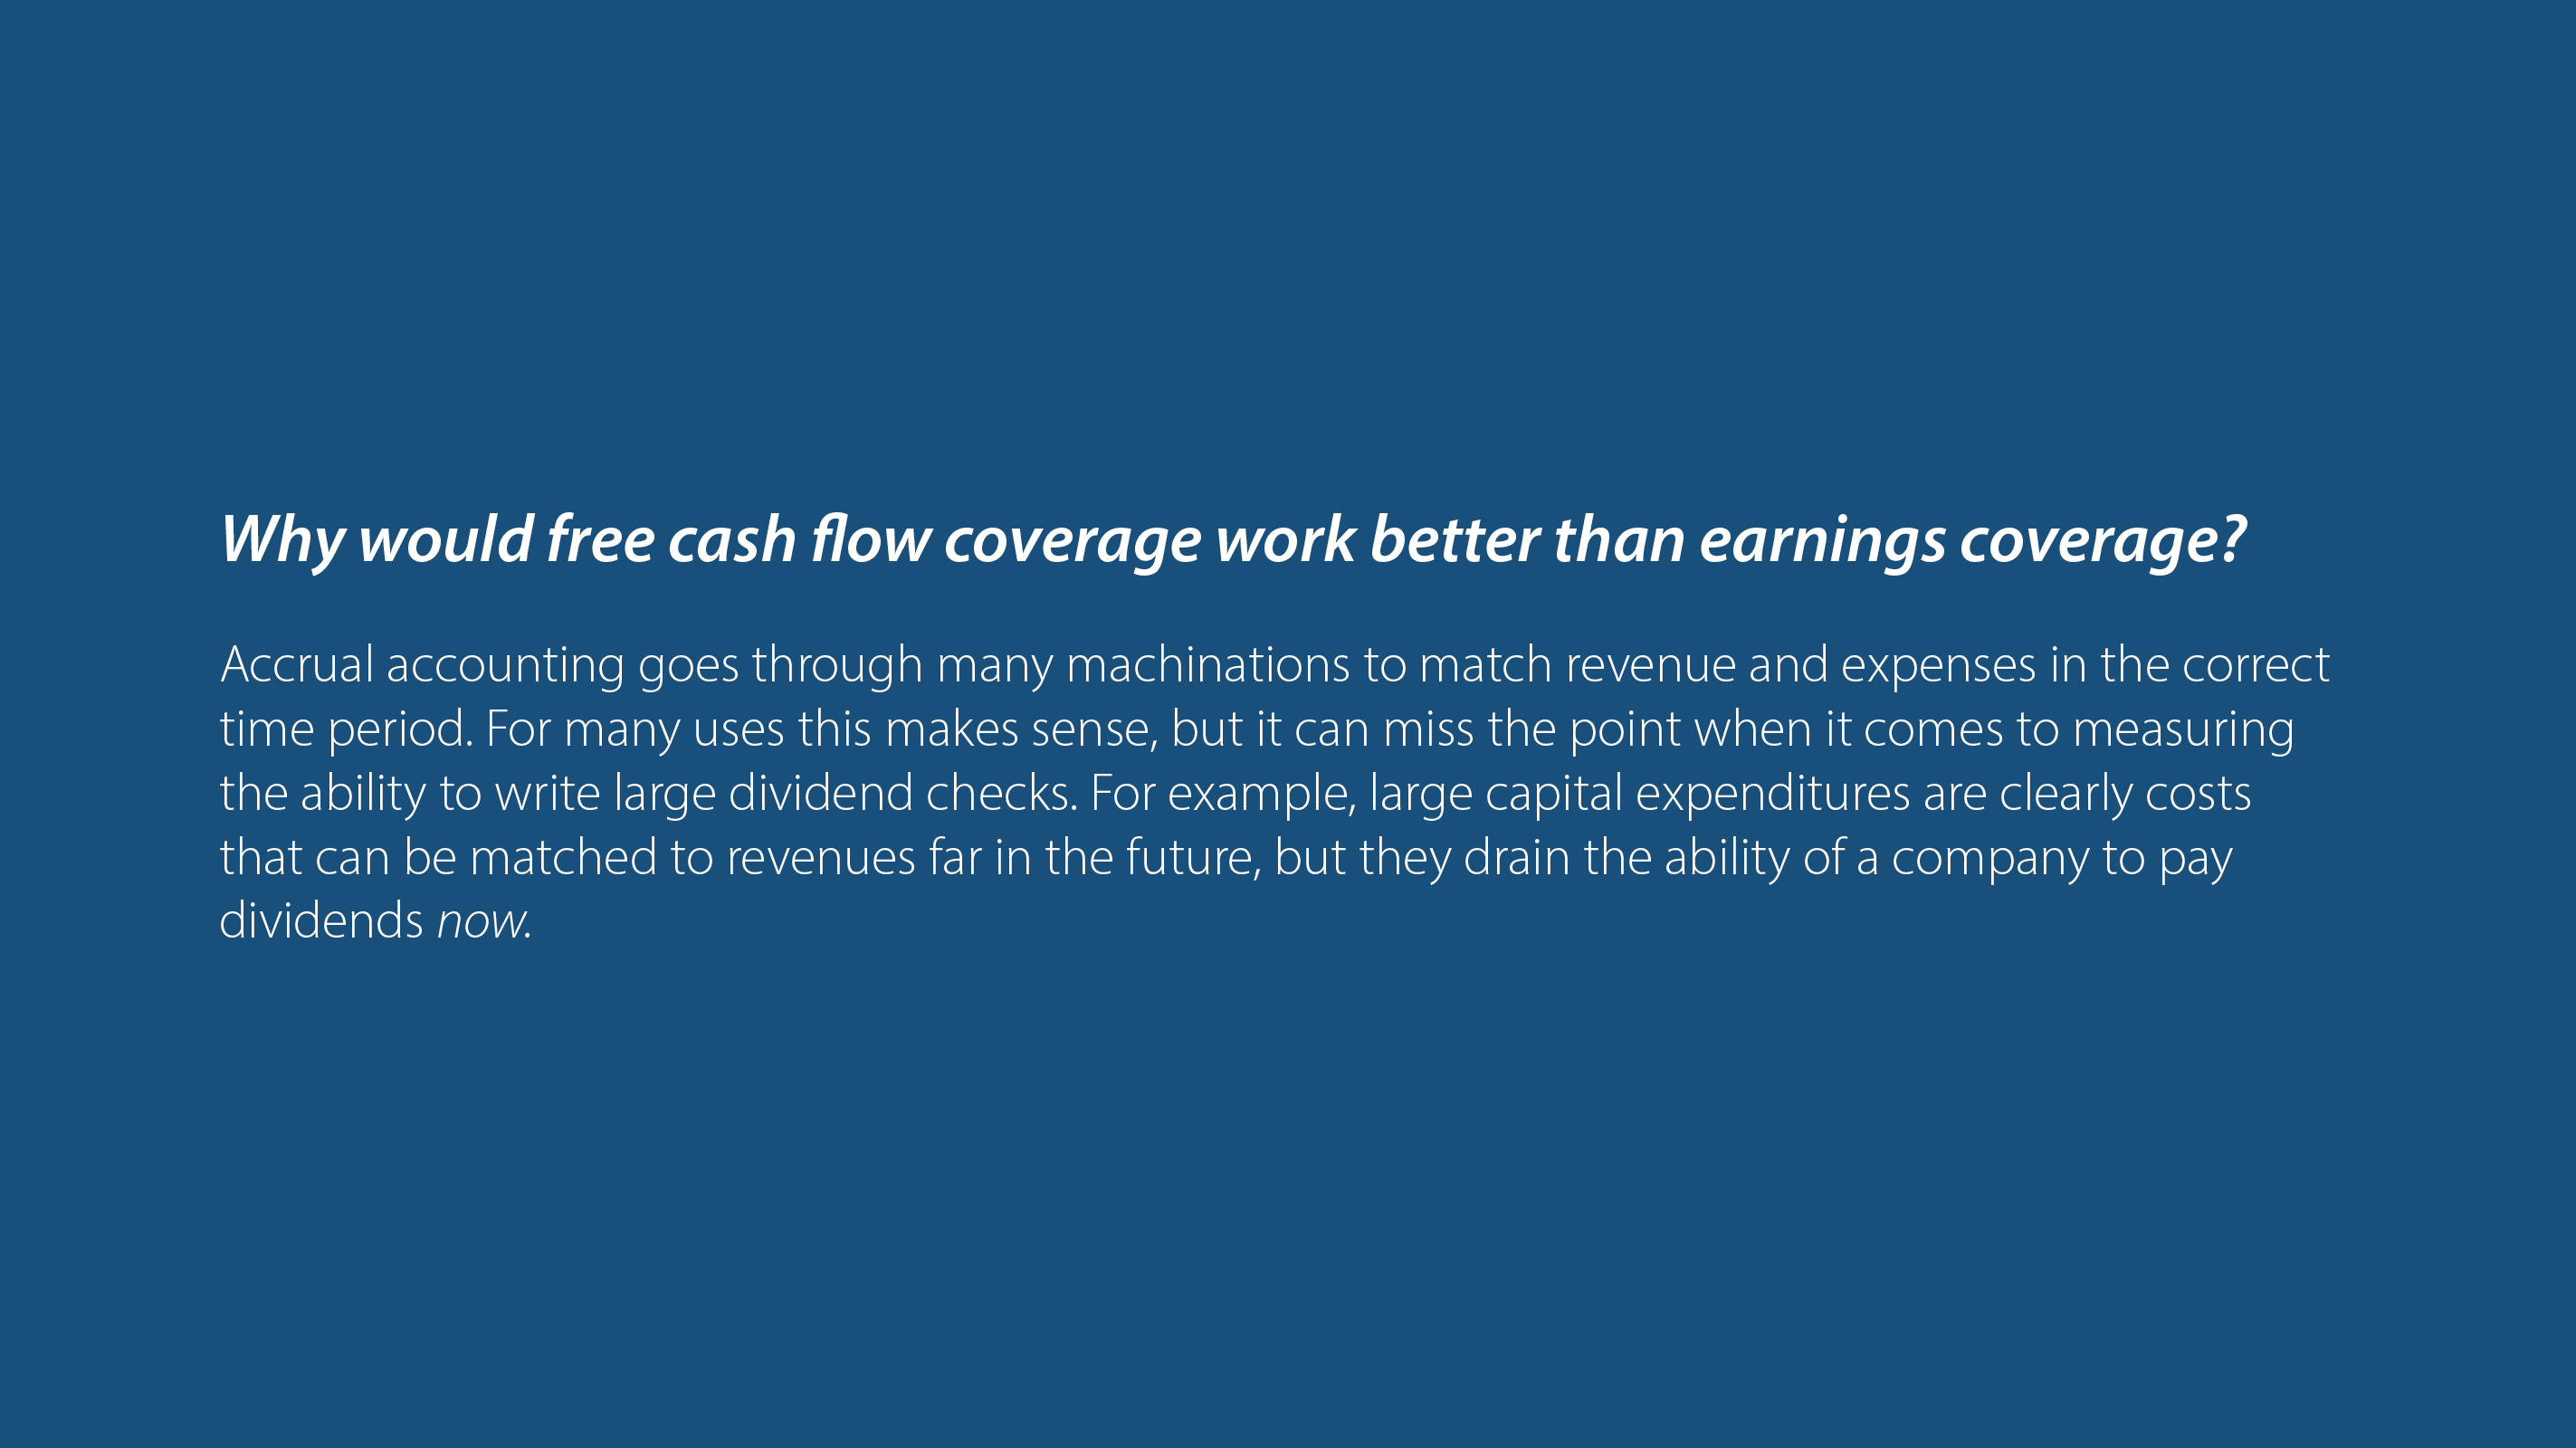 Why would free cash flow coverage work better than earnings coverage?